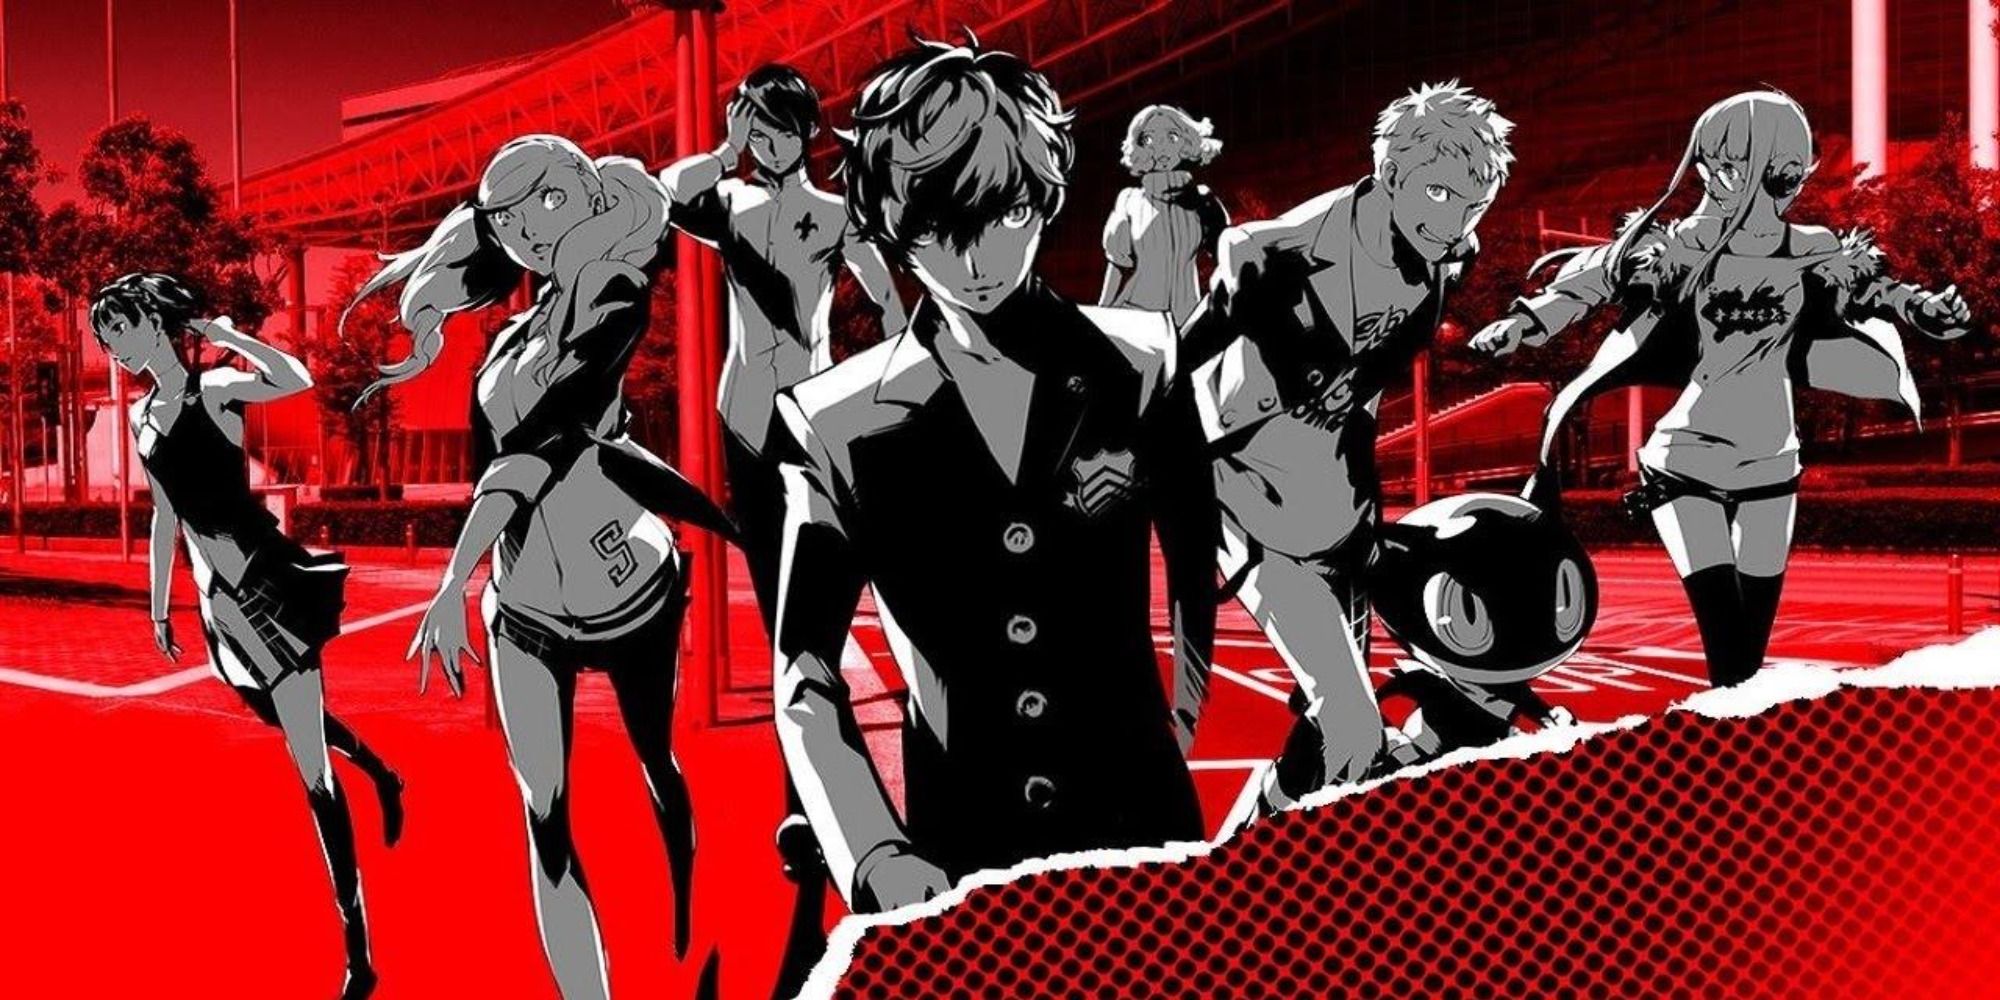 Key Art showing every main character in Persona 5